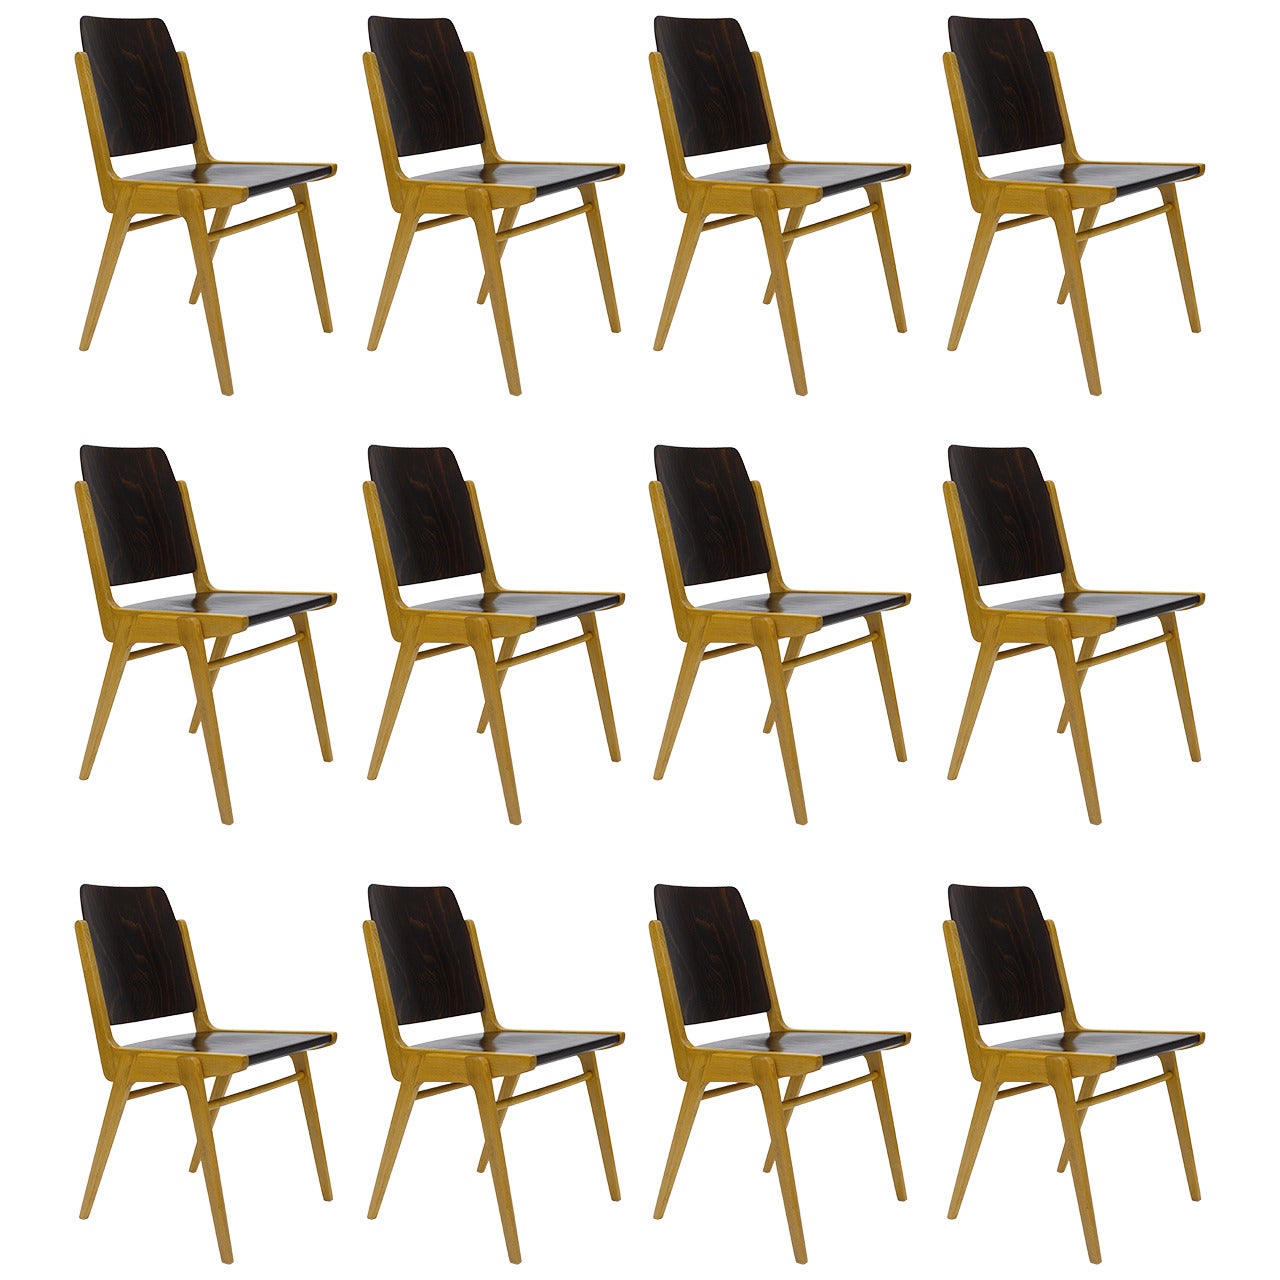 Up to 12 Austro Chair Stacking Chairs by Franz Schuster, Wiesner-Hager